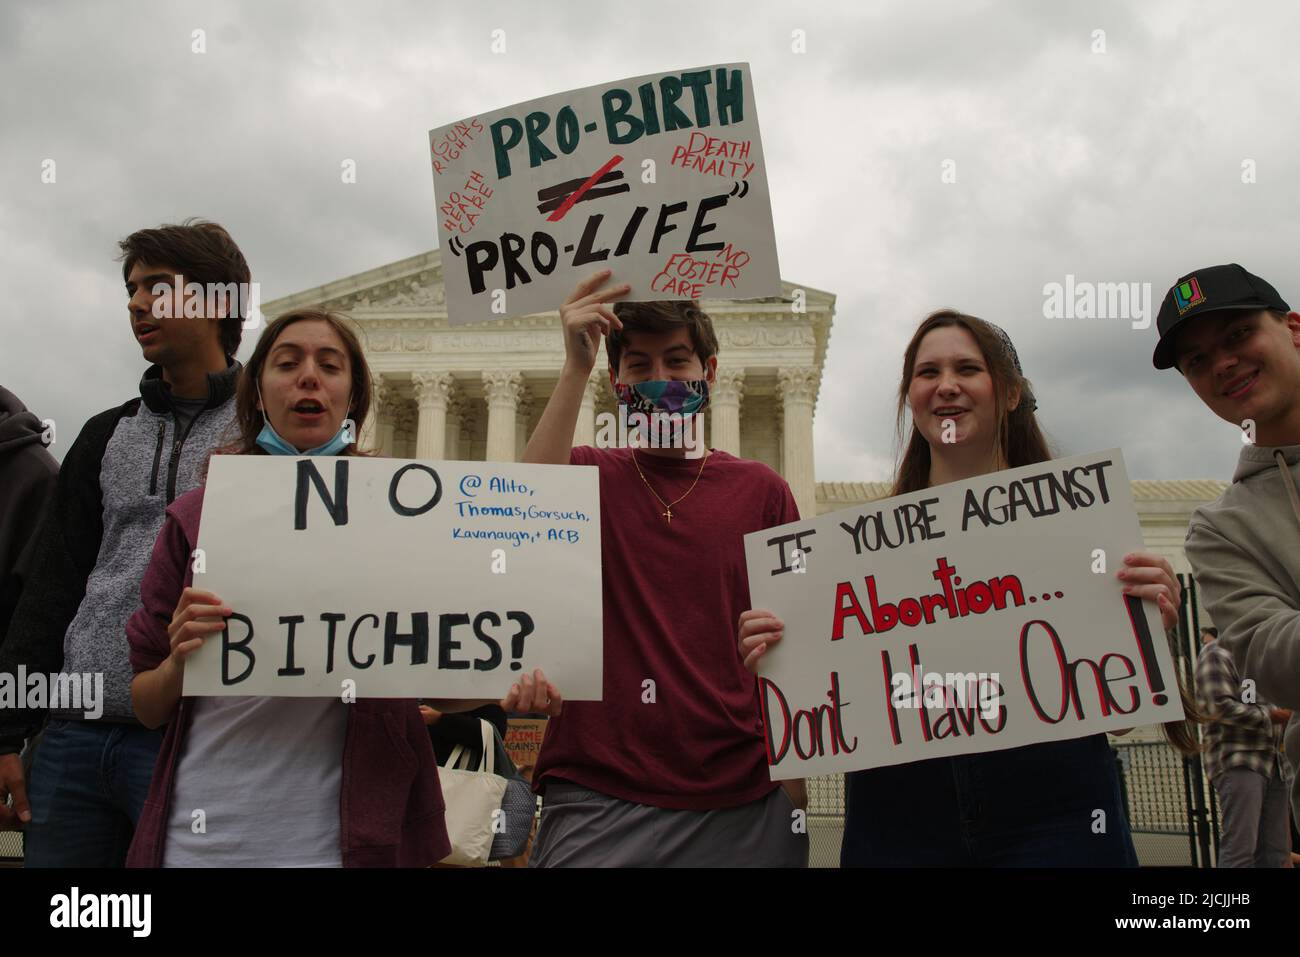 Washington - 5 May 2022: Pro-choice protesters chant and hold signs supporting Roe v. Wade in front of the U.S. Supreme Court. Stock Photo